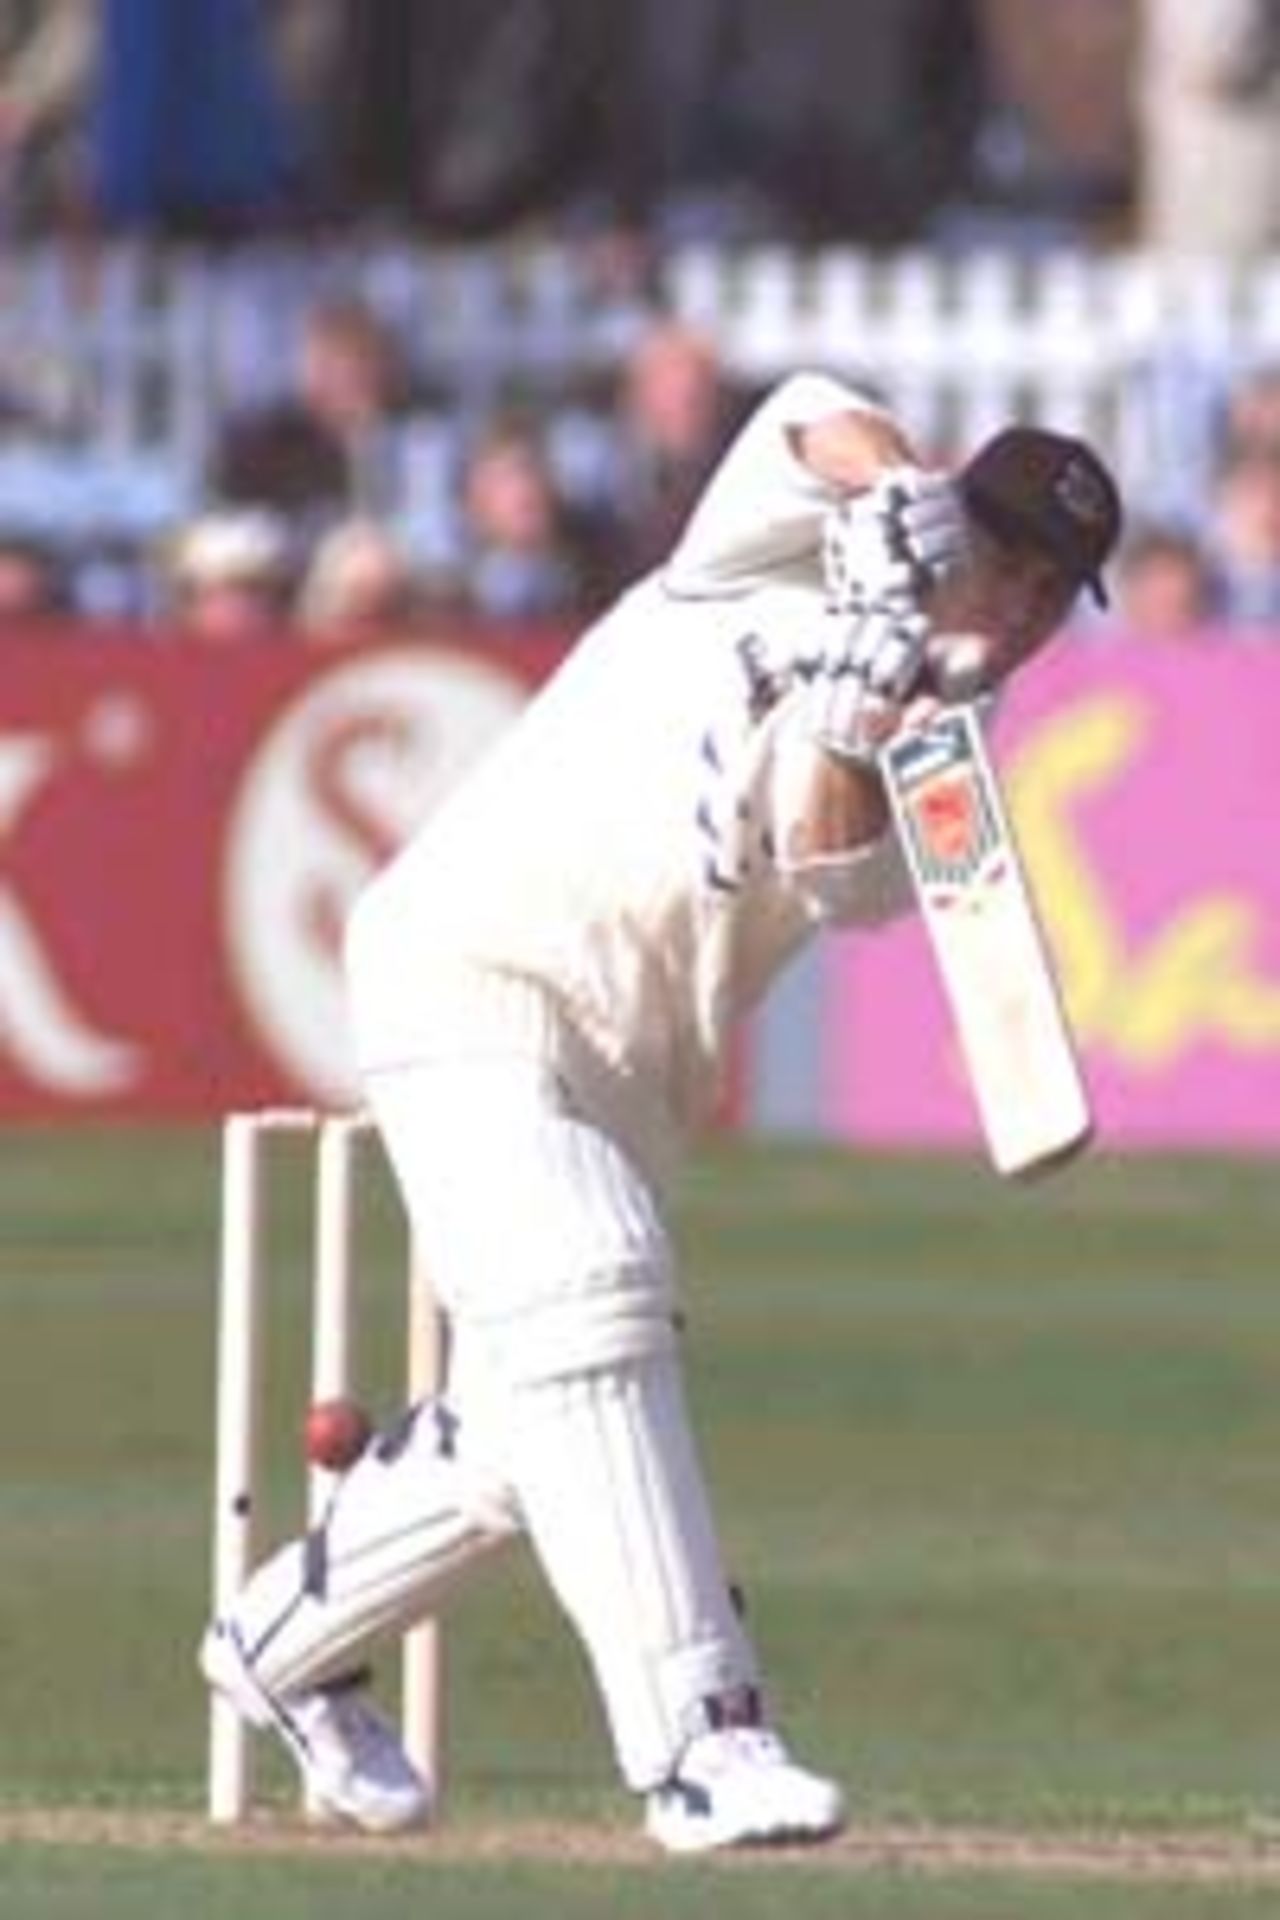 23 Apr 2000: Michael Bevan of Sussex hits out during the Benson and Hedges game between Sussex and Hampshire at the County Ground Hove, Brighton.